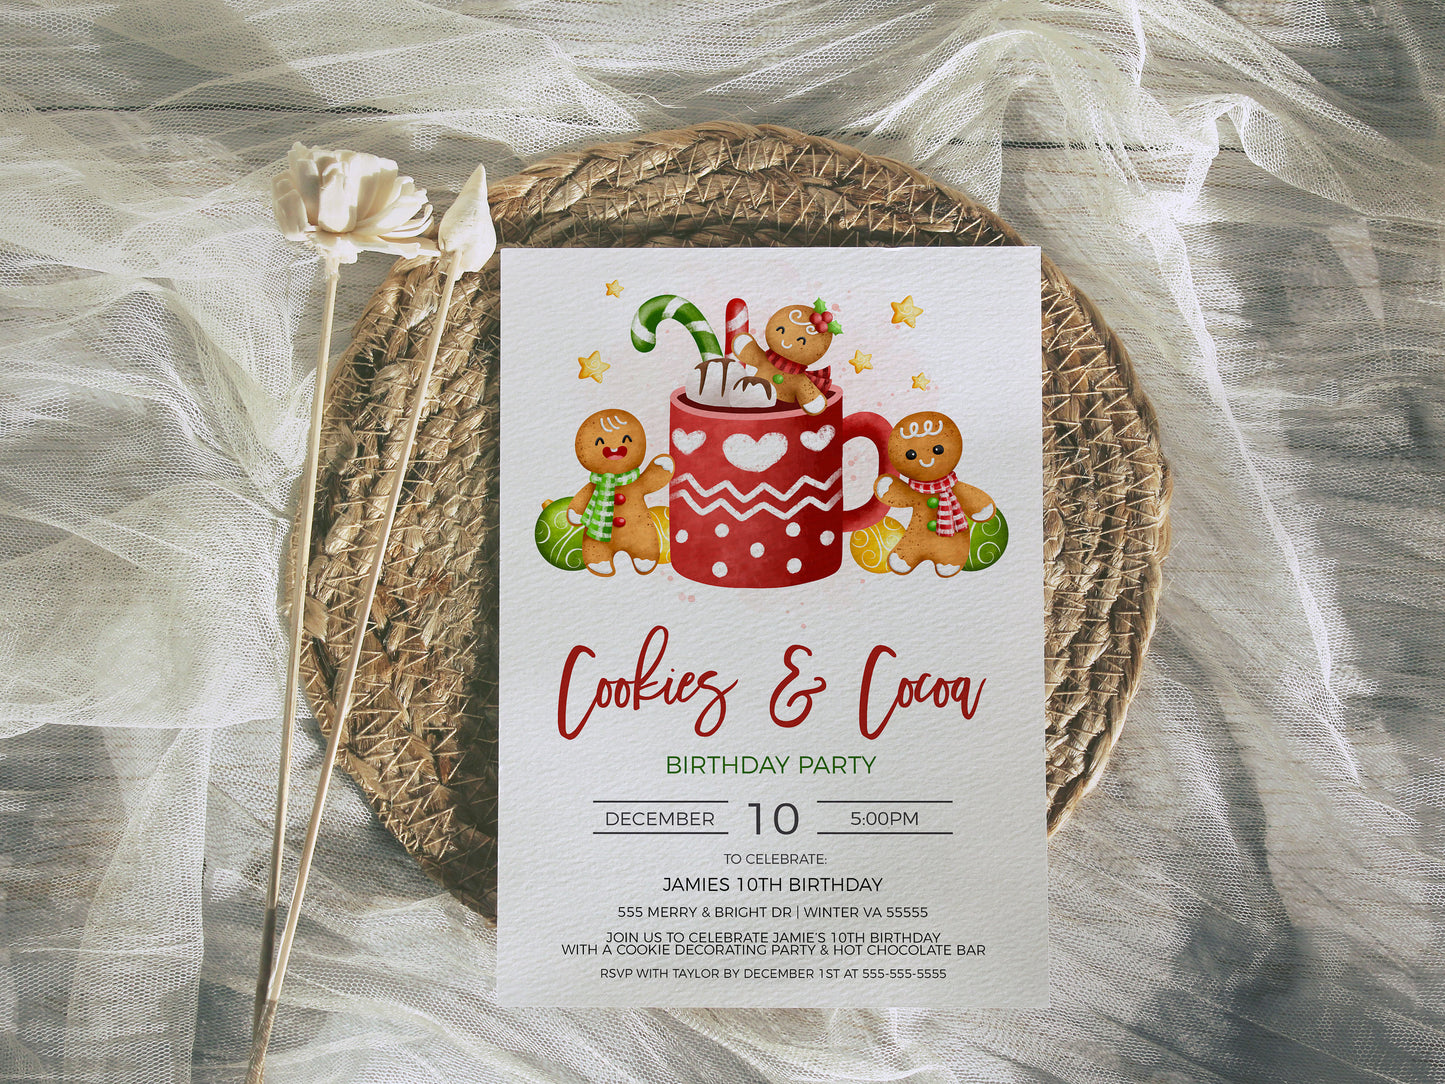 Christmas Cookies & Cocoa Birthday Party Invitation, Editable Birthday Cookie Decorating And Hot Chocolate Bar Party, DIY Printable Template